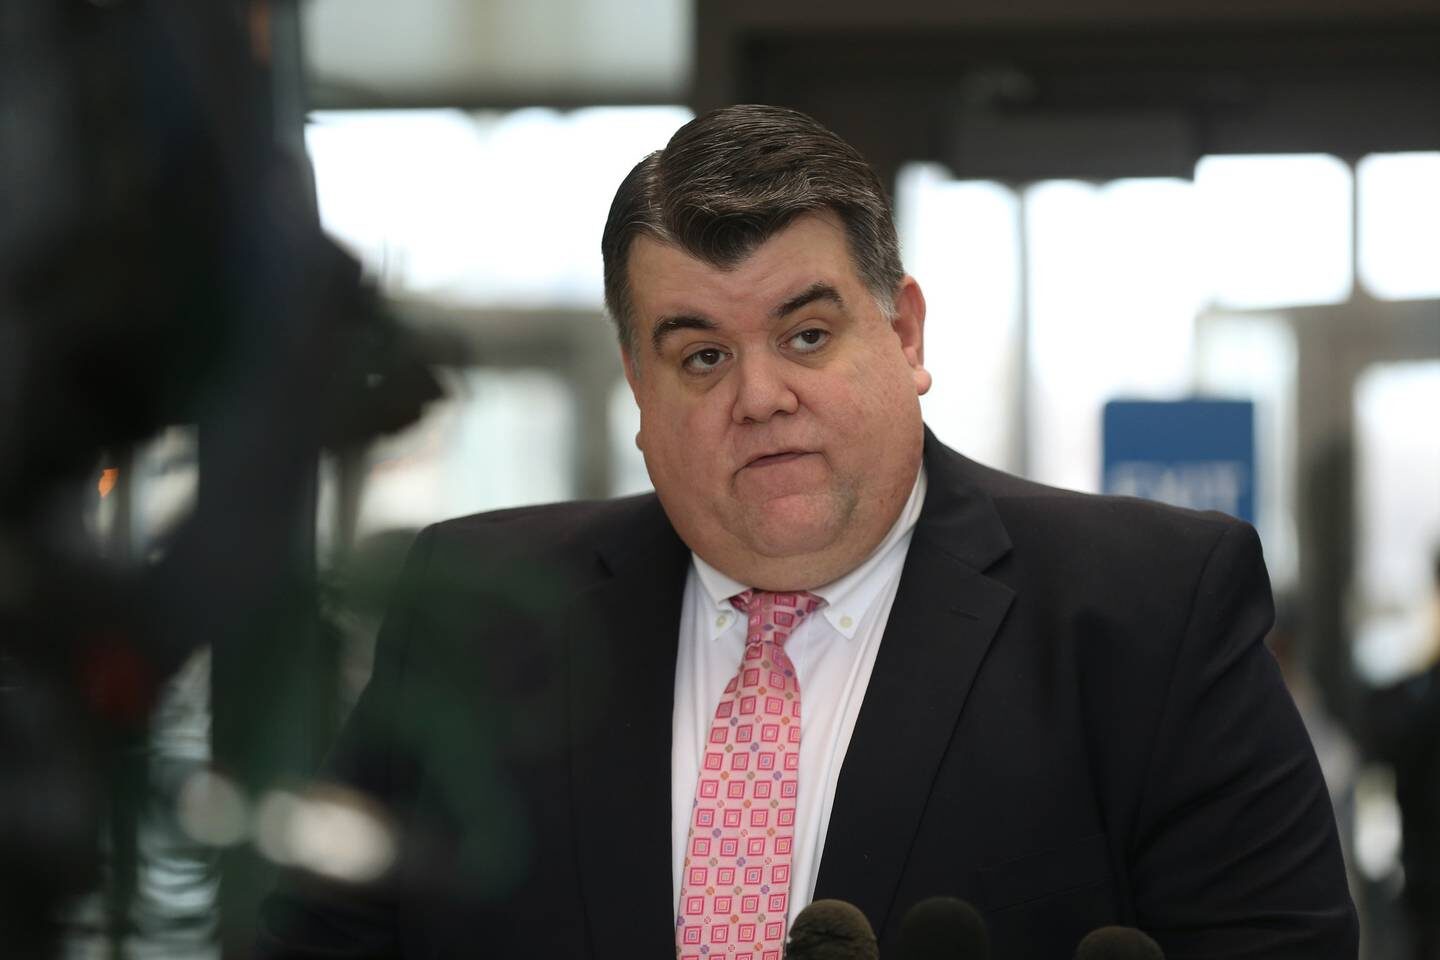 Cook County Assistant State's Attorney James Murphy kim foxx quits